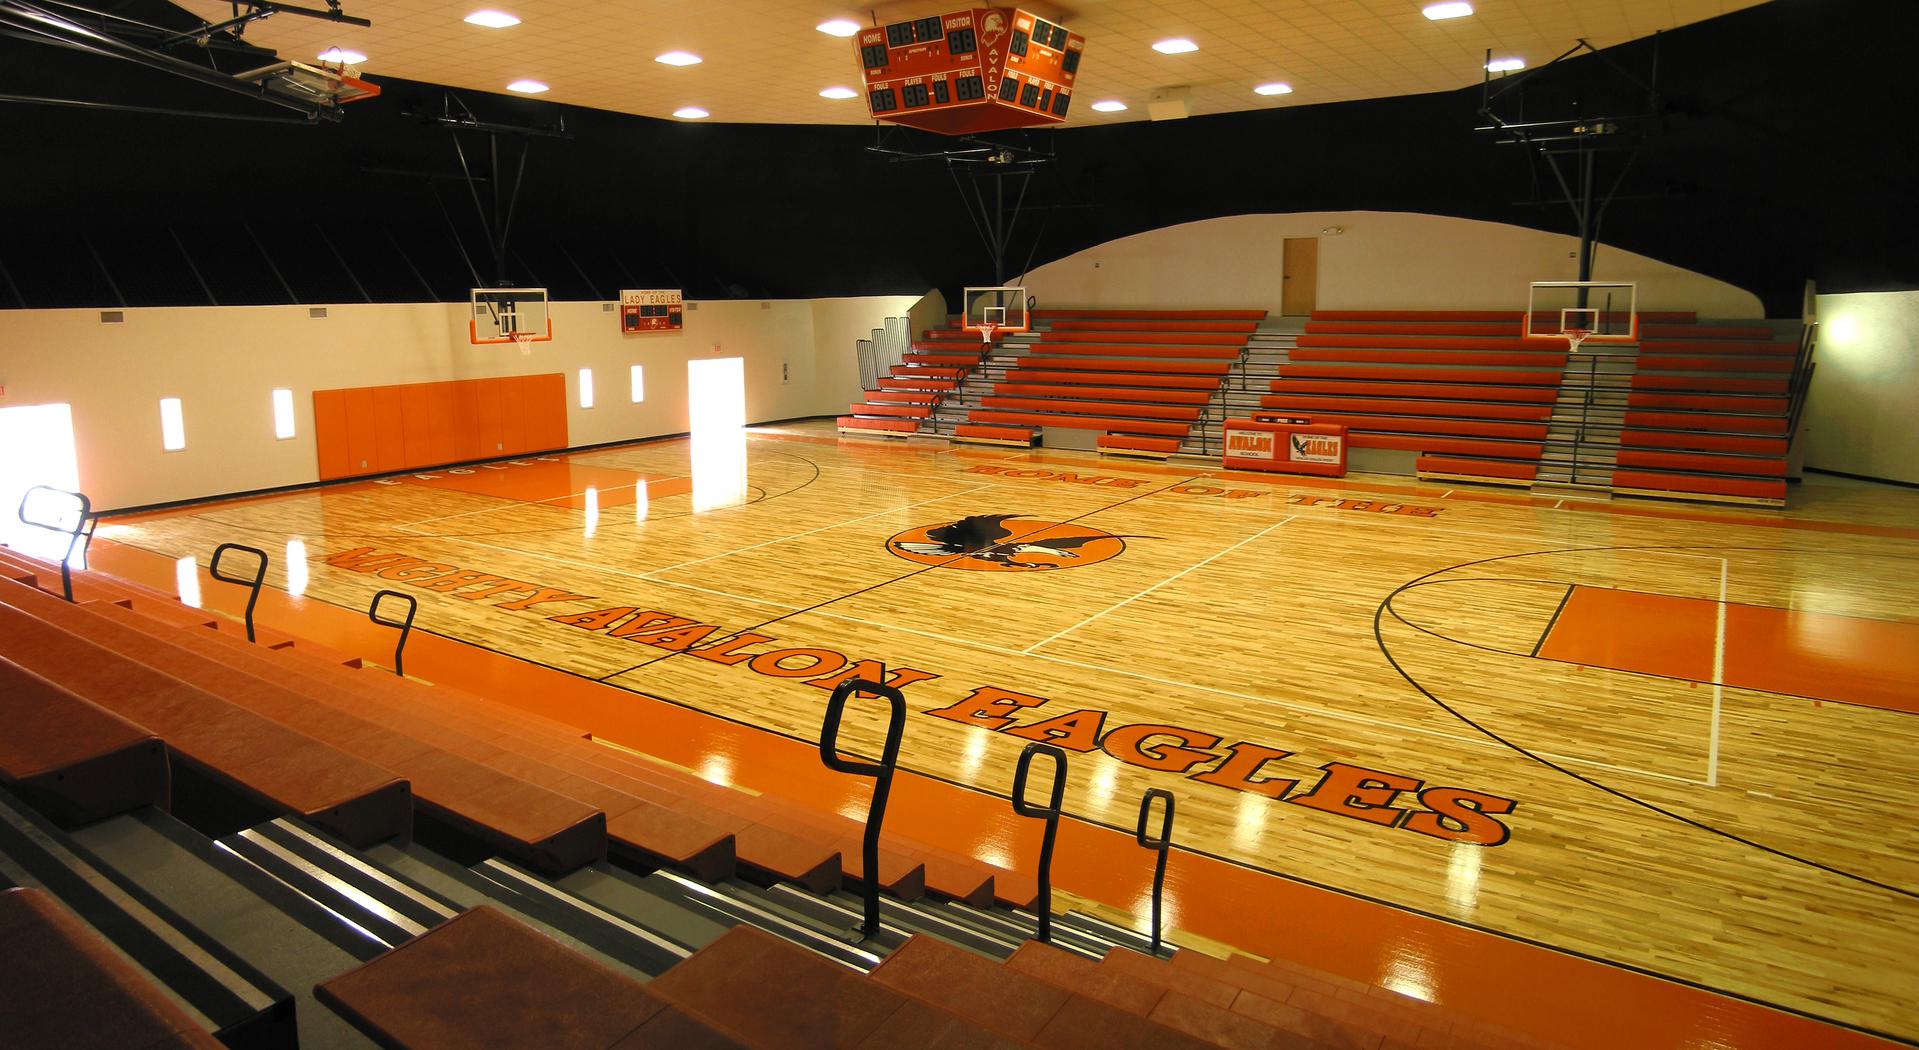 The competition basketball court inside.